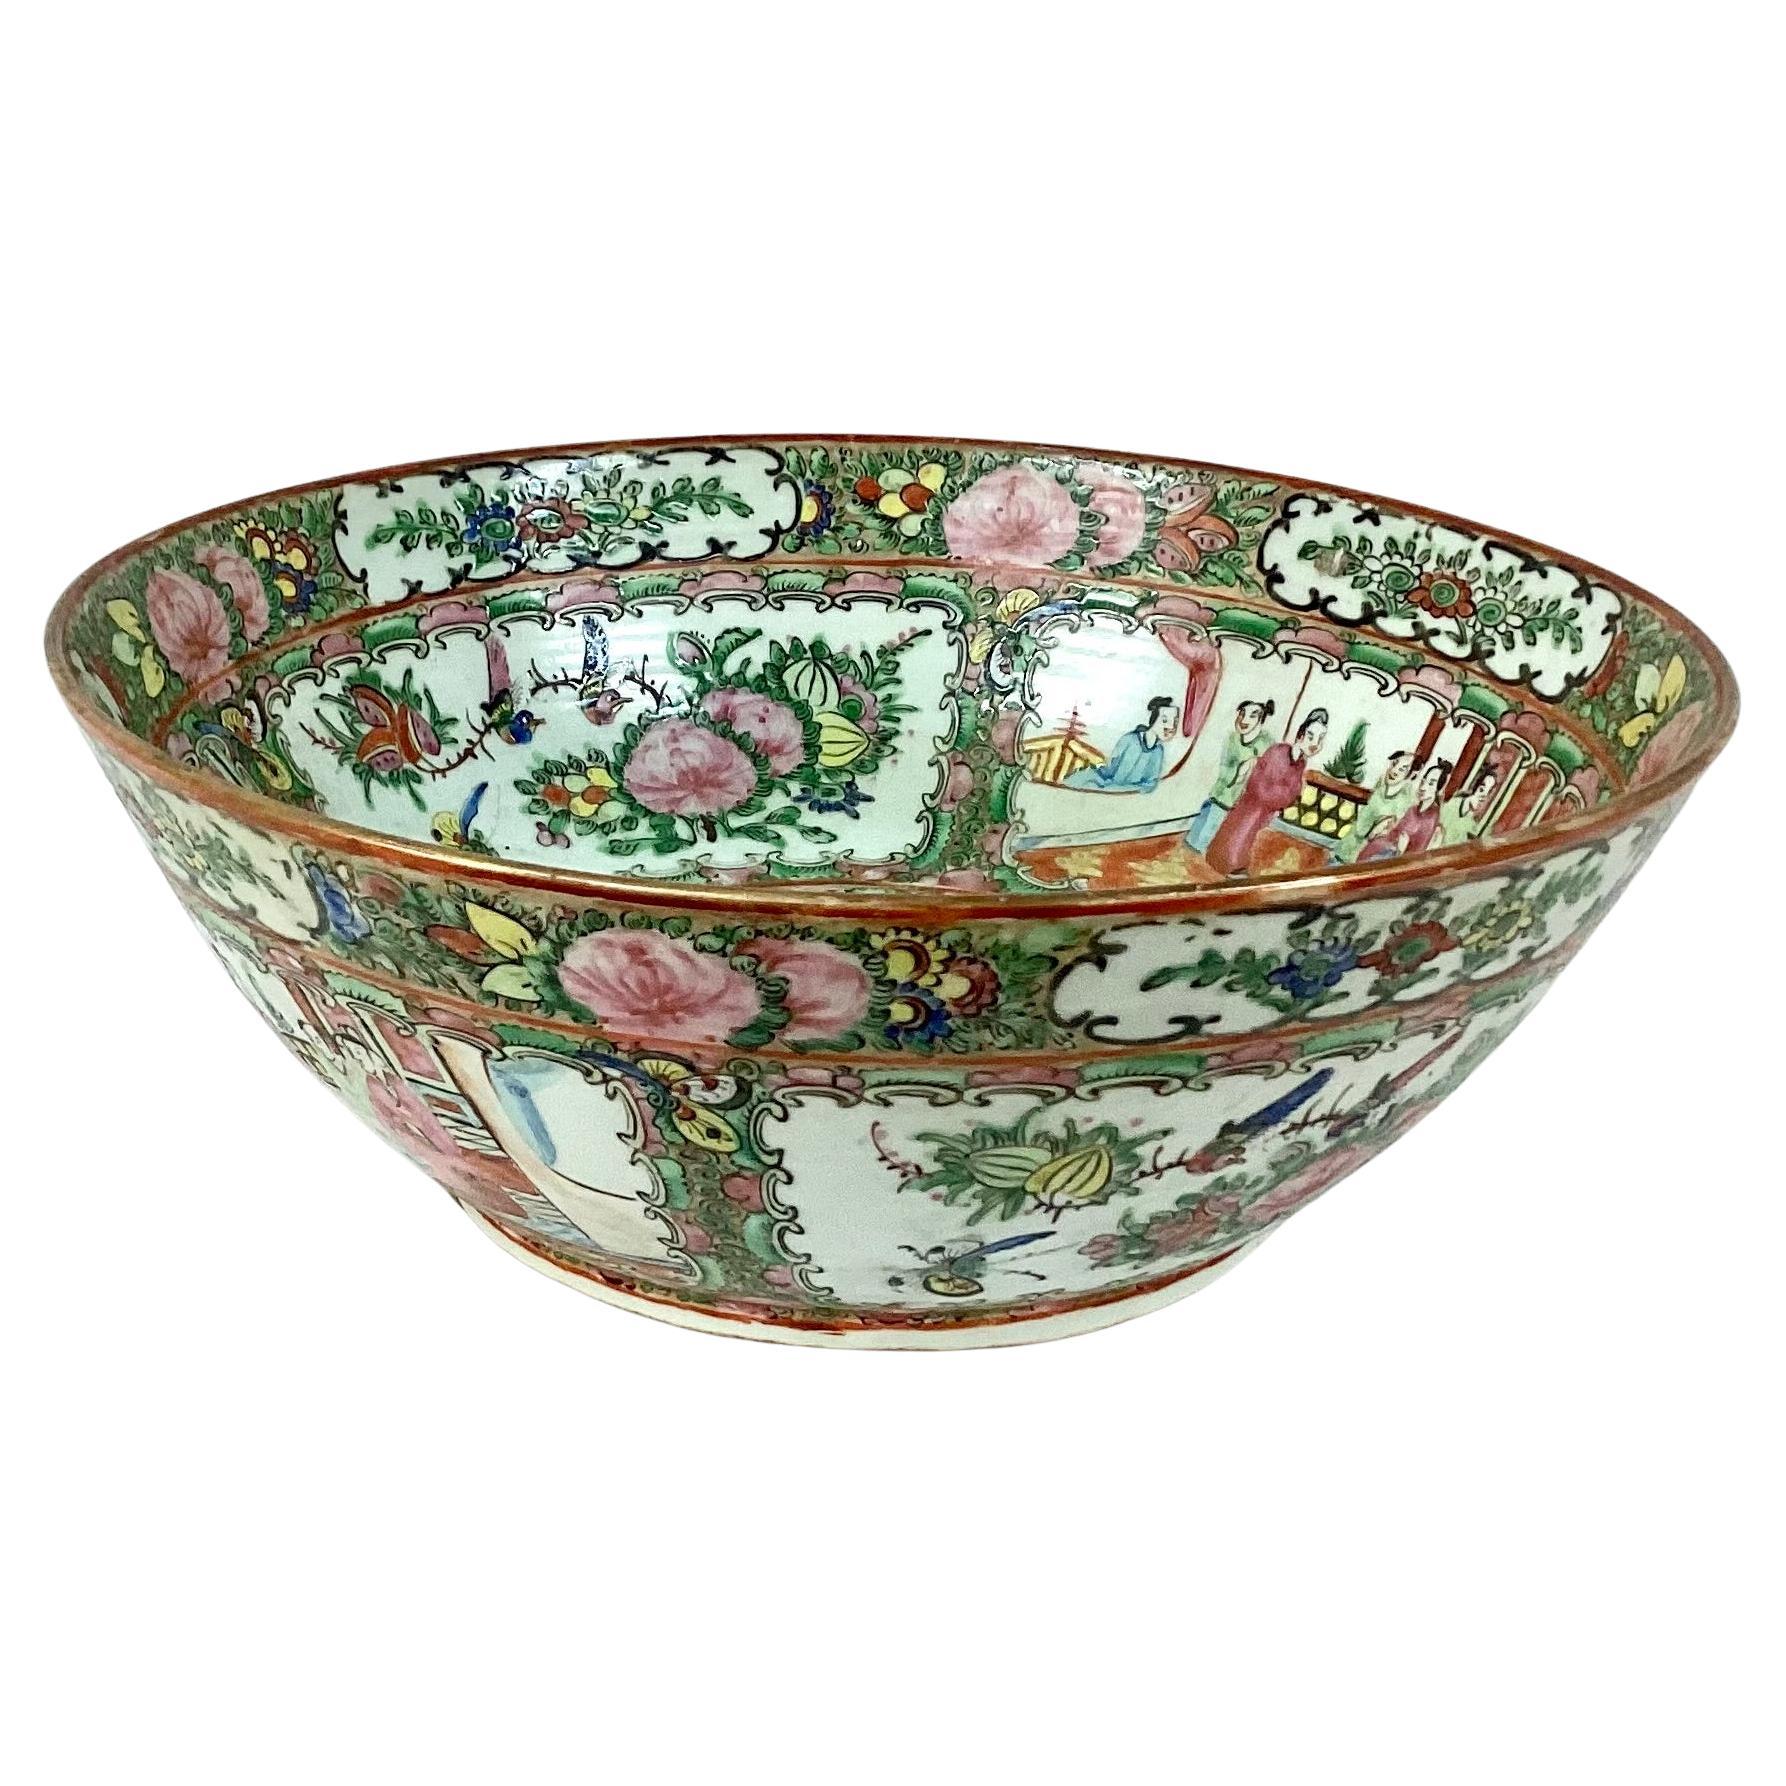 Large colorful vintage Chinese export famille rose medallion porcelain bowl. Features classic oriental scenes with Chinese people throughout. Overall, the piece is in wonderful condition with a beautiful vivid multi-color palette.

